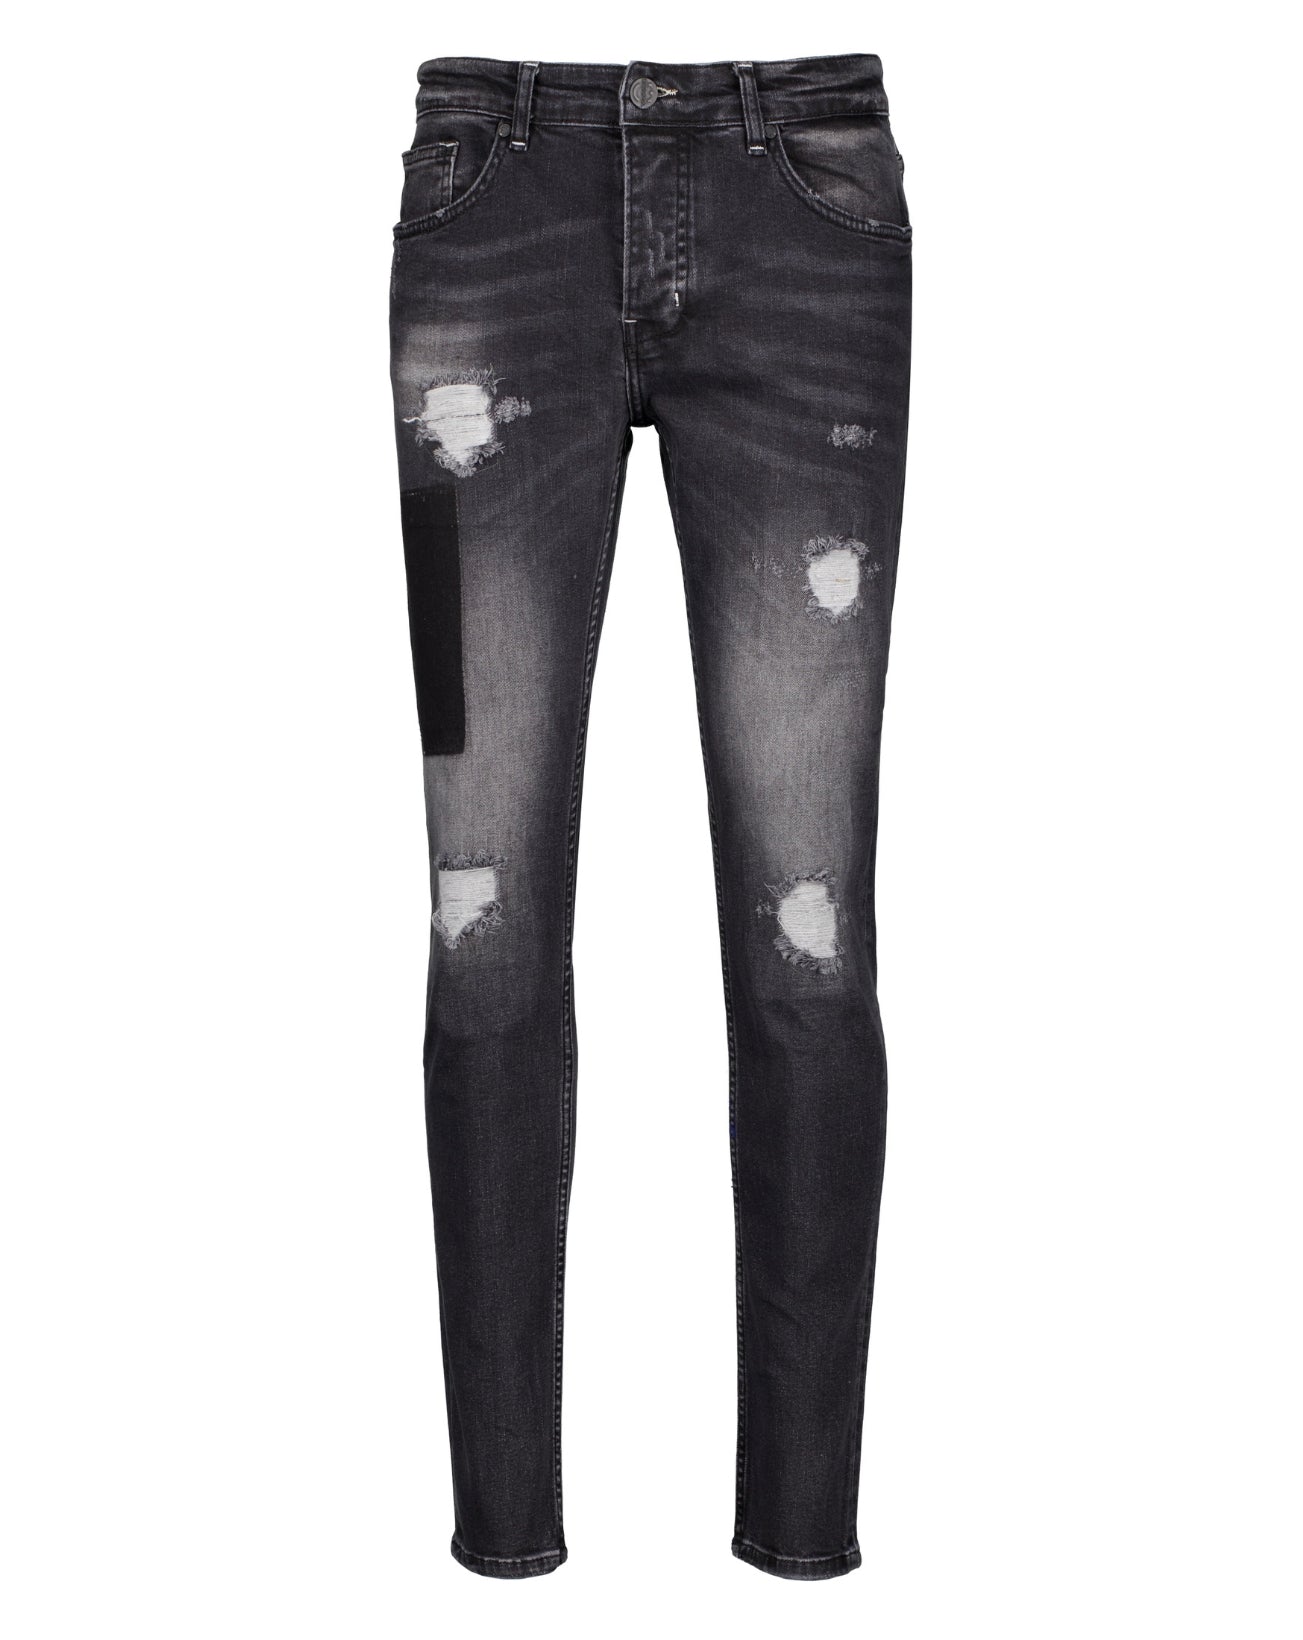 The Lazio Grey Ripped Jeans - Jeans by Urbbana